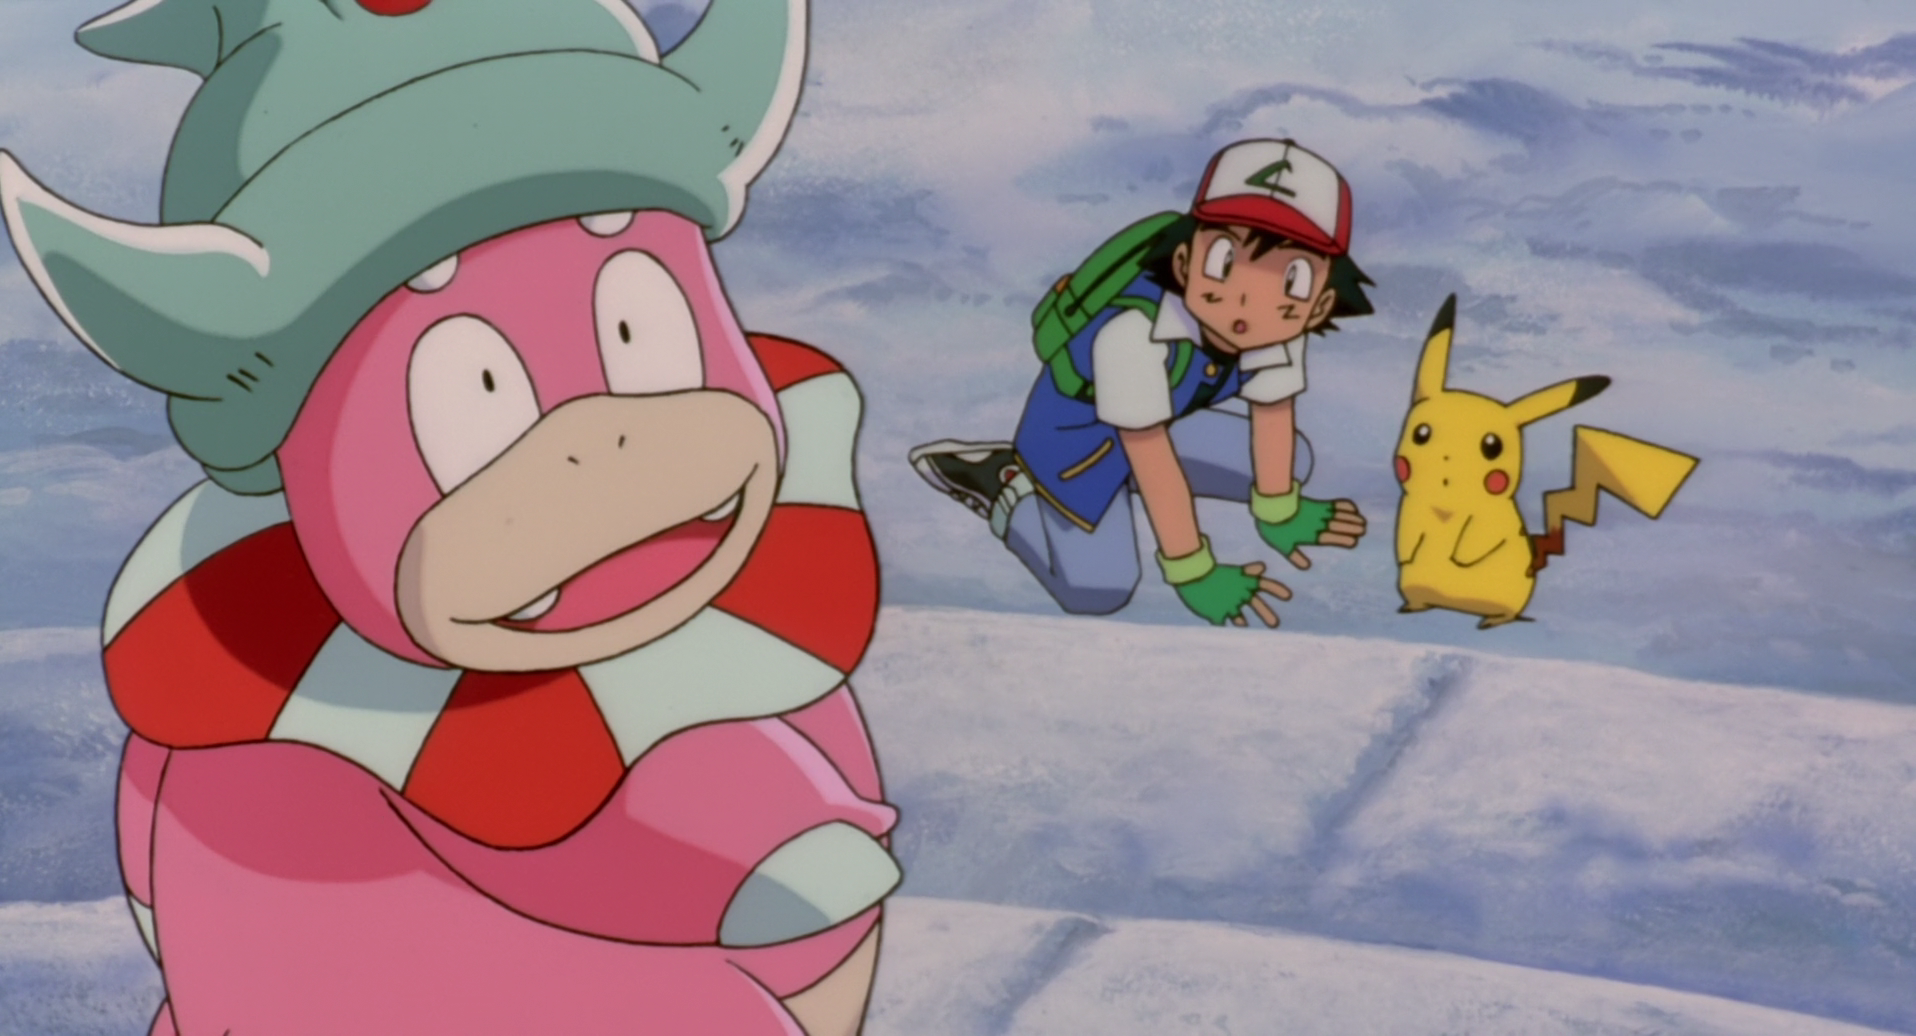 24 Awesome And Fascinating Facts About Slowking From Pokemon.